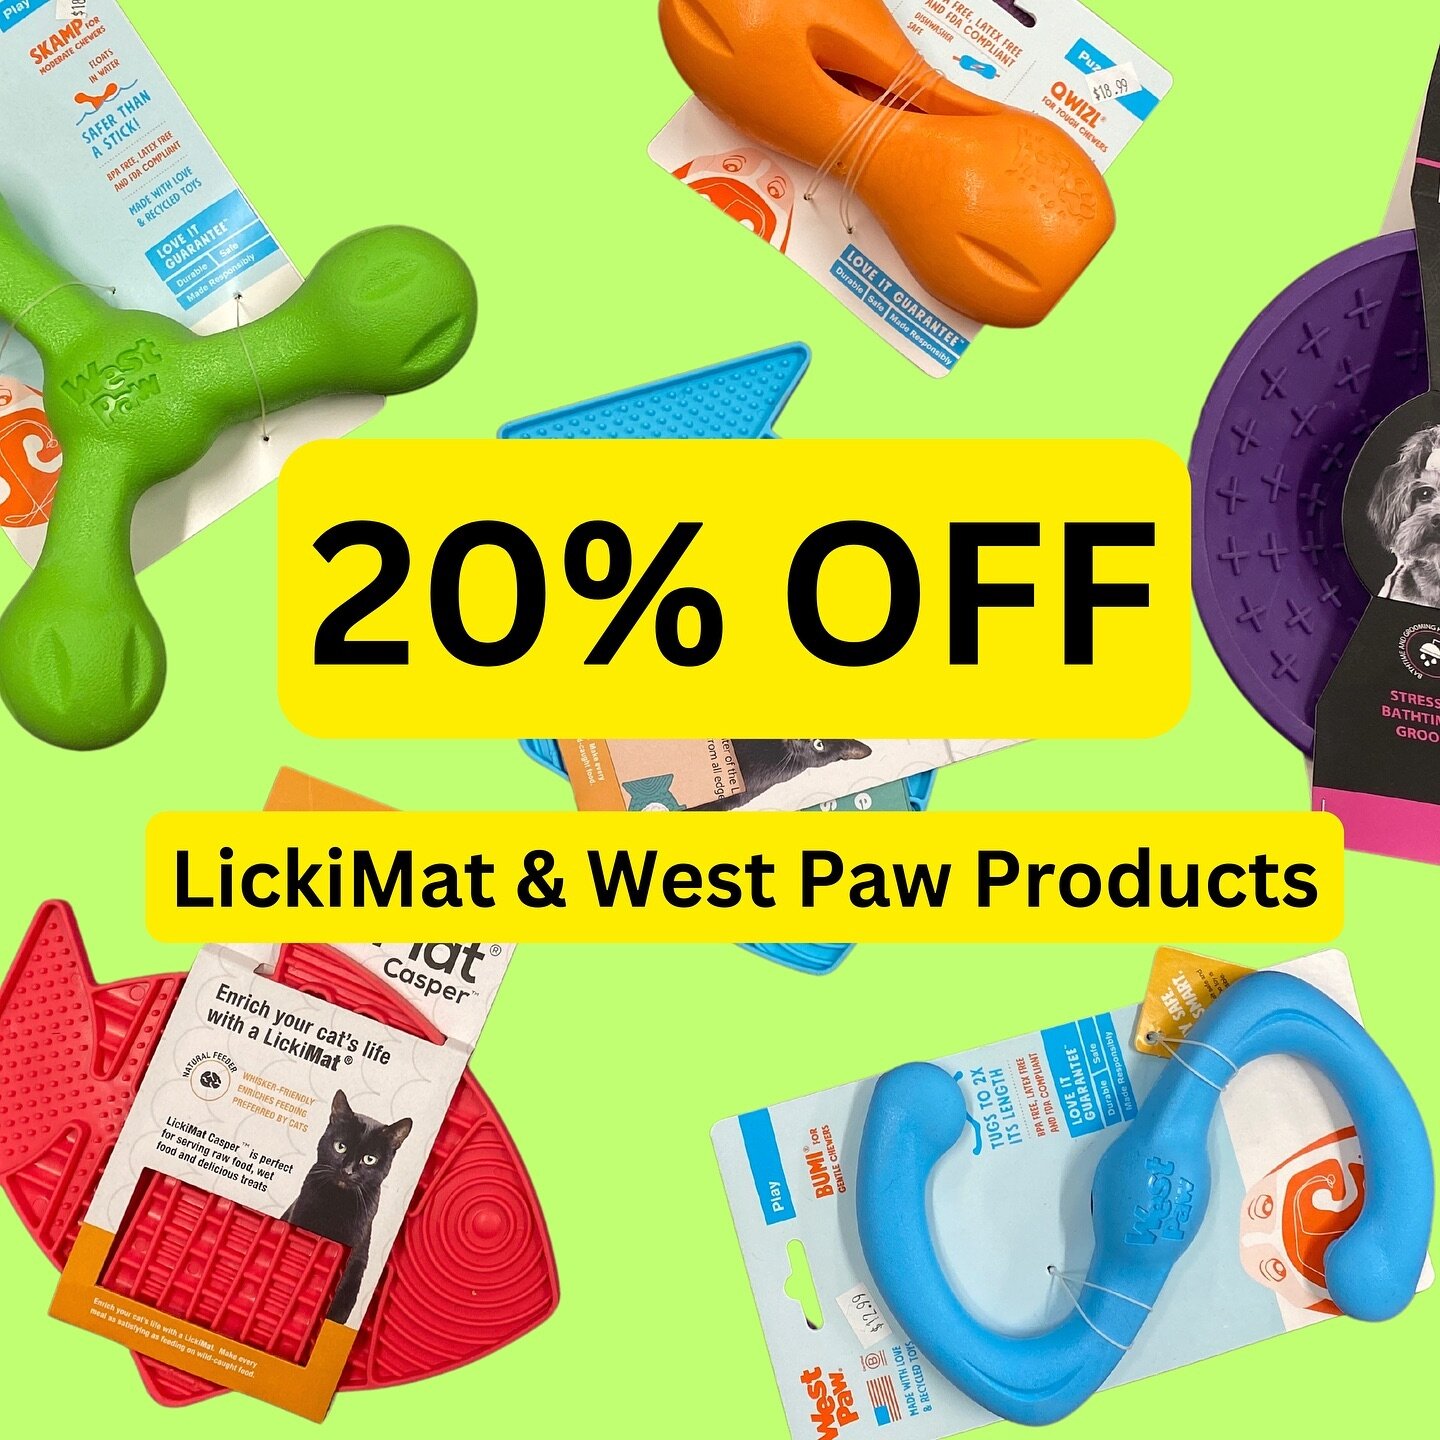 NOW THROUGH SATURDAY: Get 20% off ALL LickiMat &amp; West Paw products! Reduce anxiety and burn energy with these long-lasting chew toys 🦴